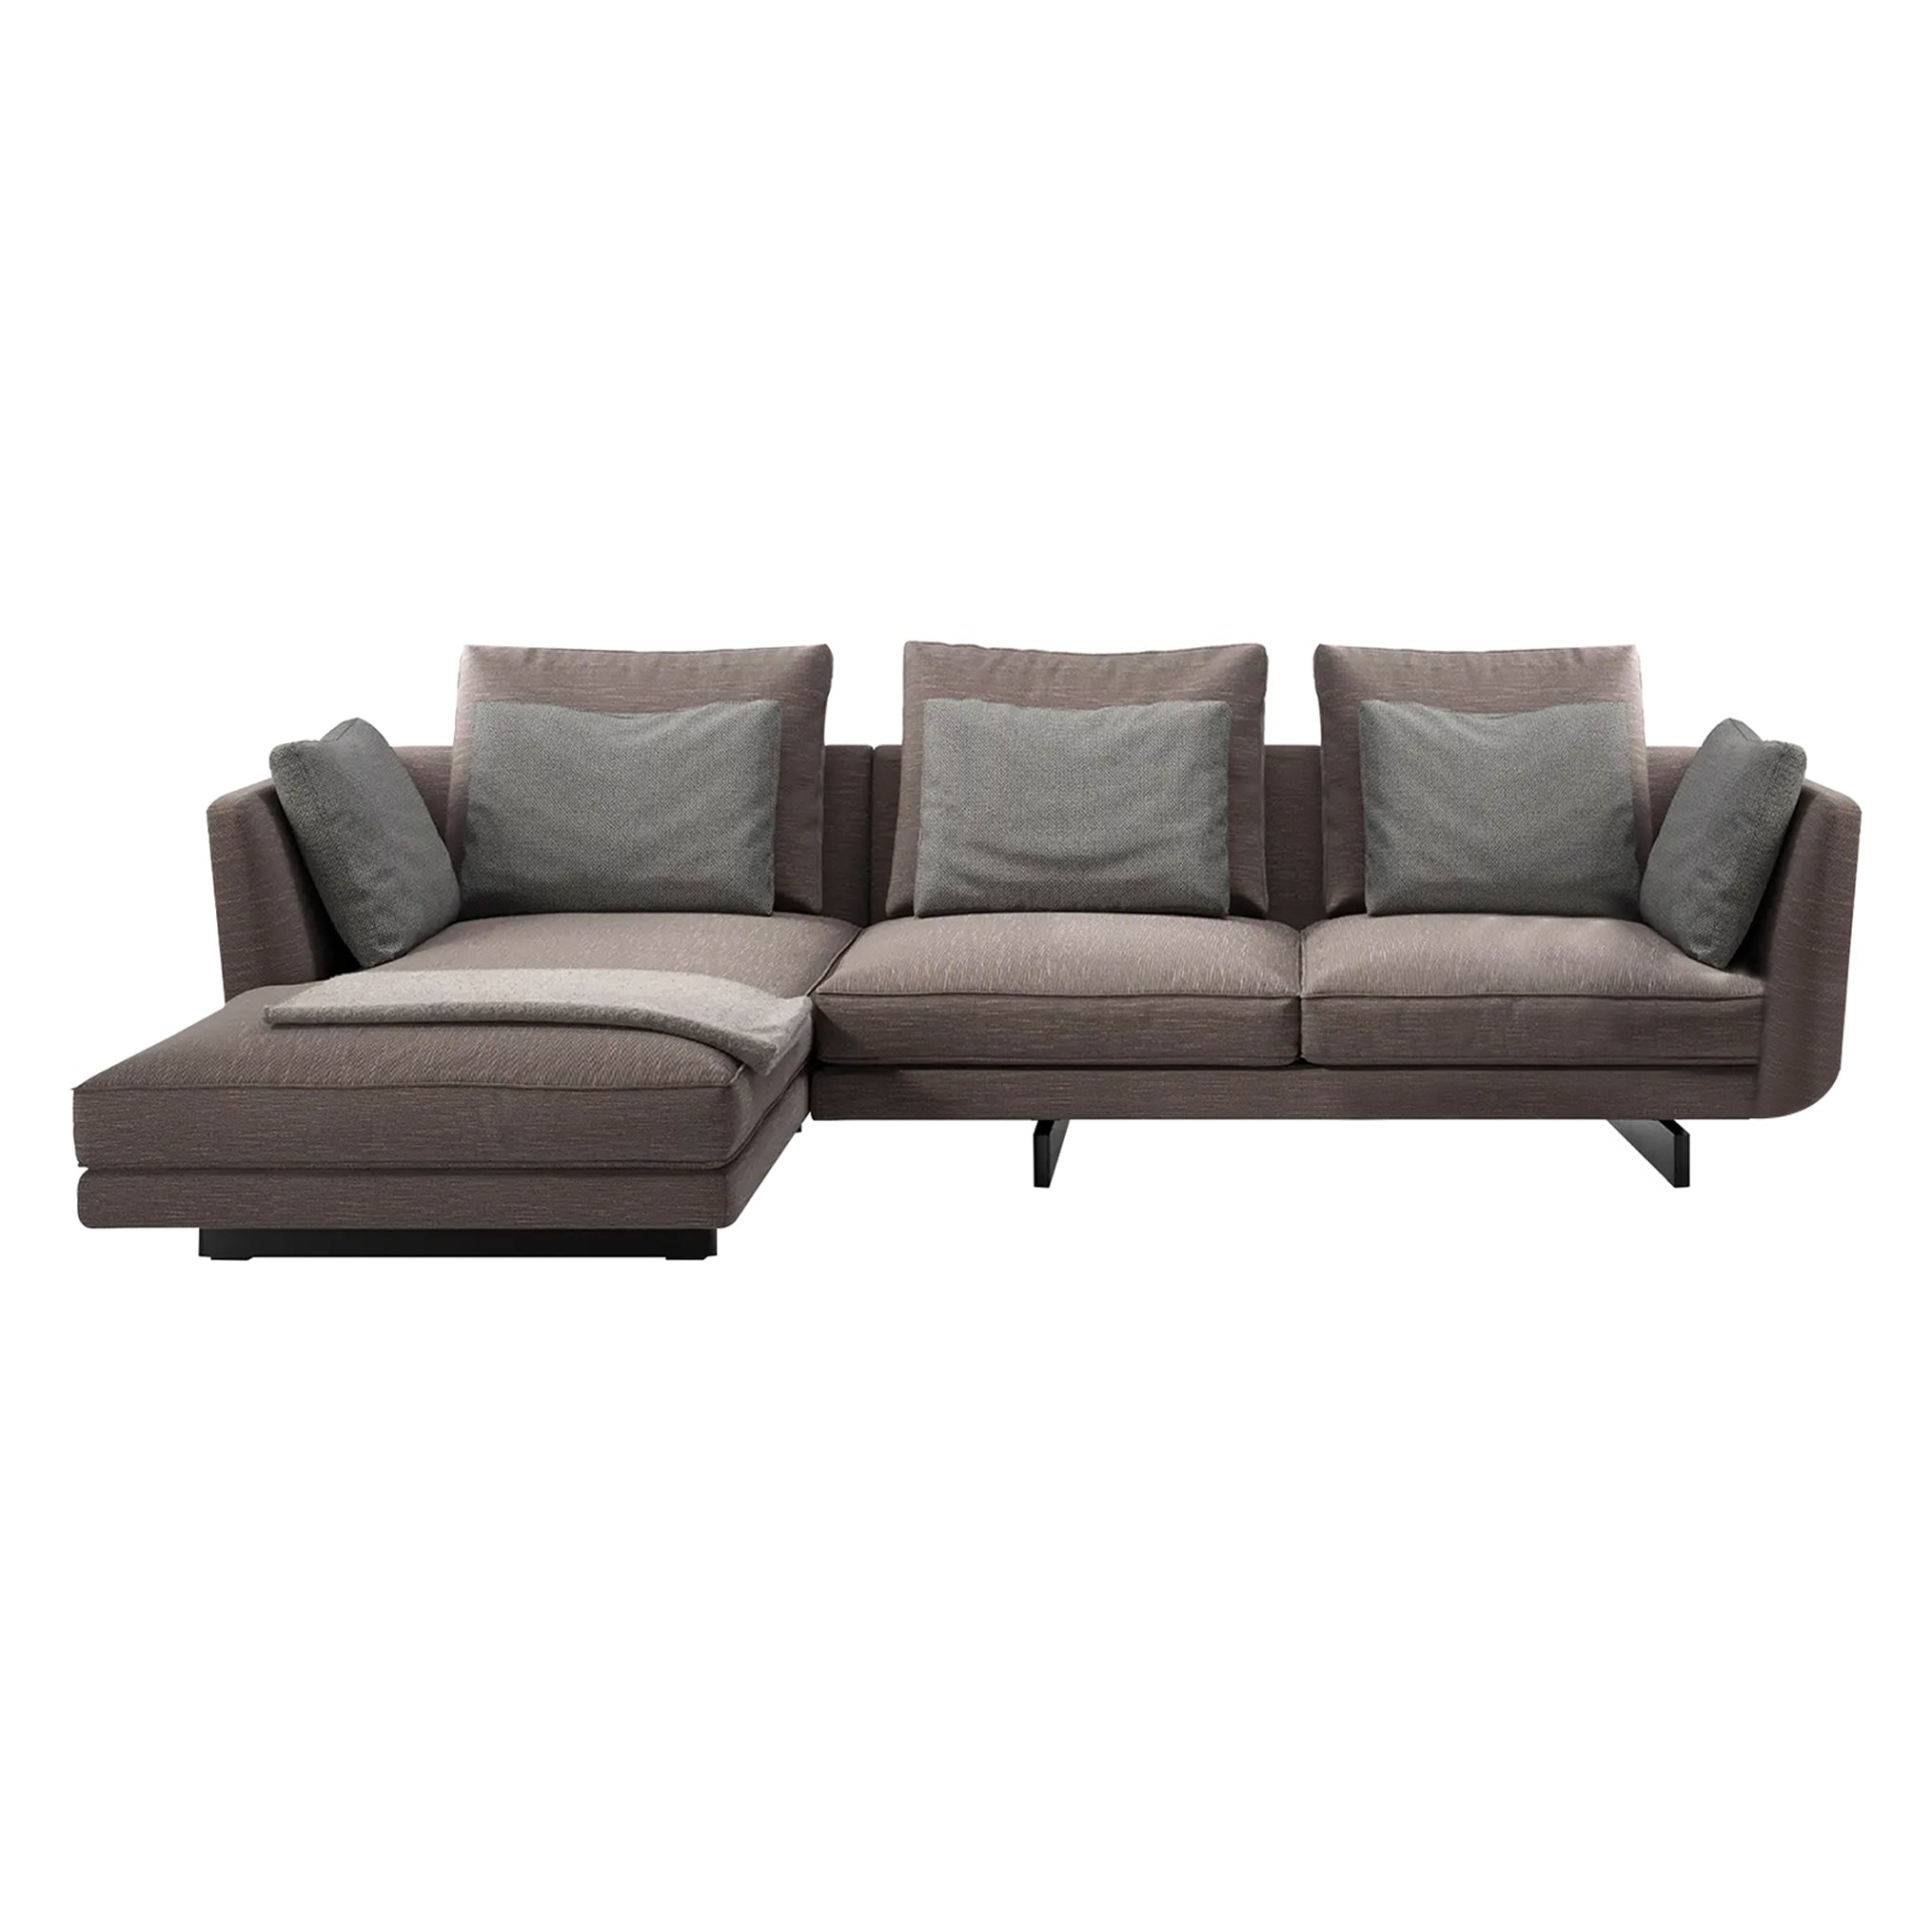 Savoy Sectional Sofa: Composition 1 + Left